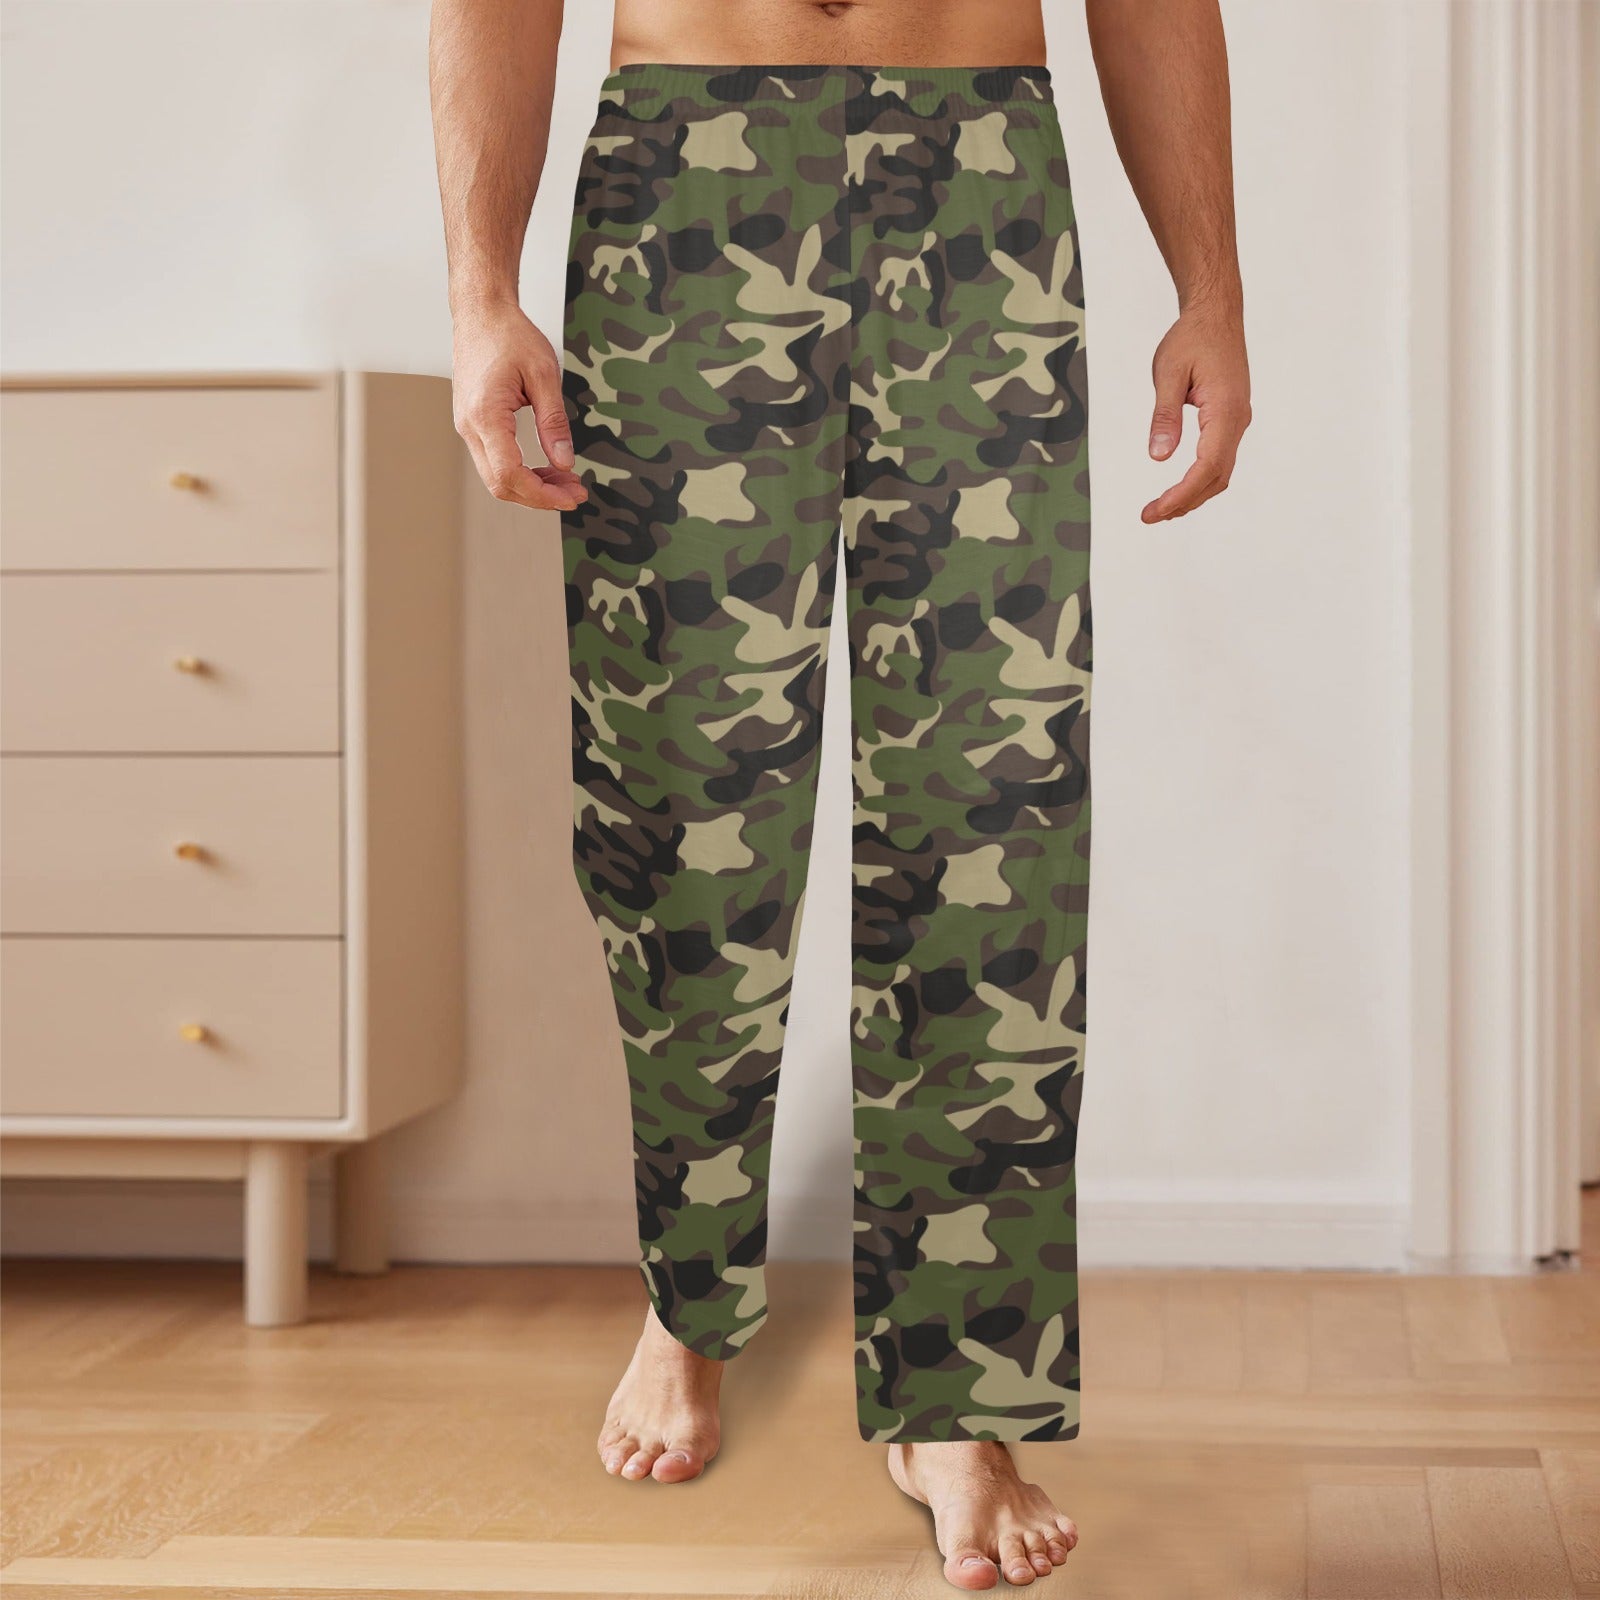 CAMOUFLAGE CIVILIAN TROUSERS / MITCHELL PATTERN – The Real McCoy's